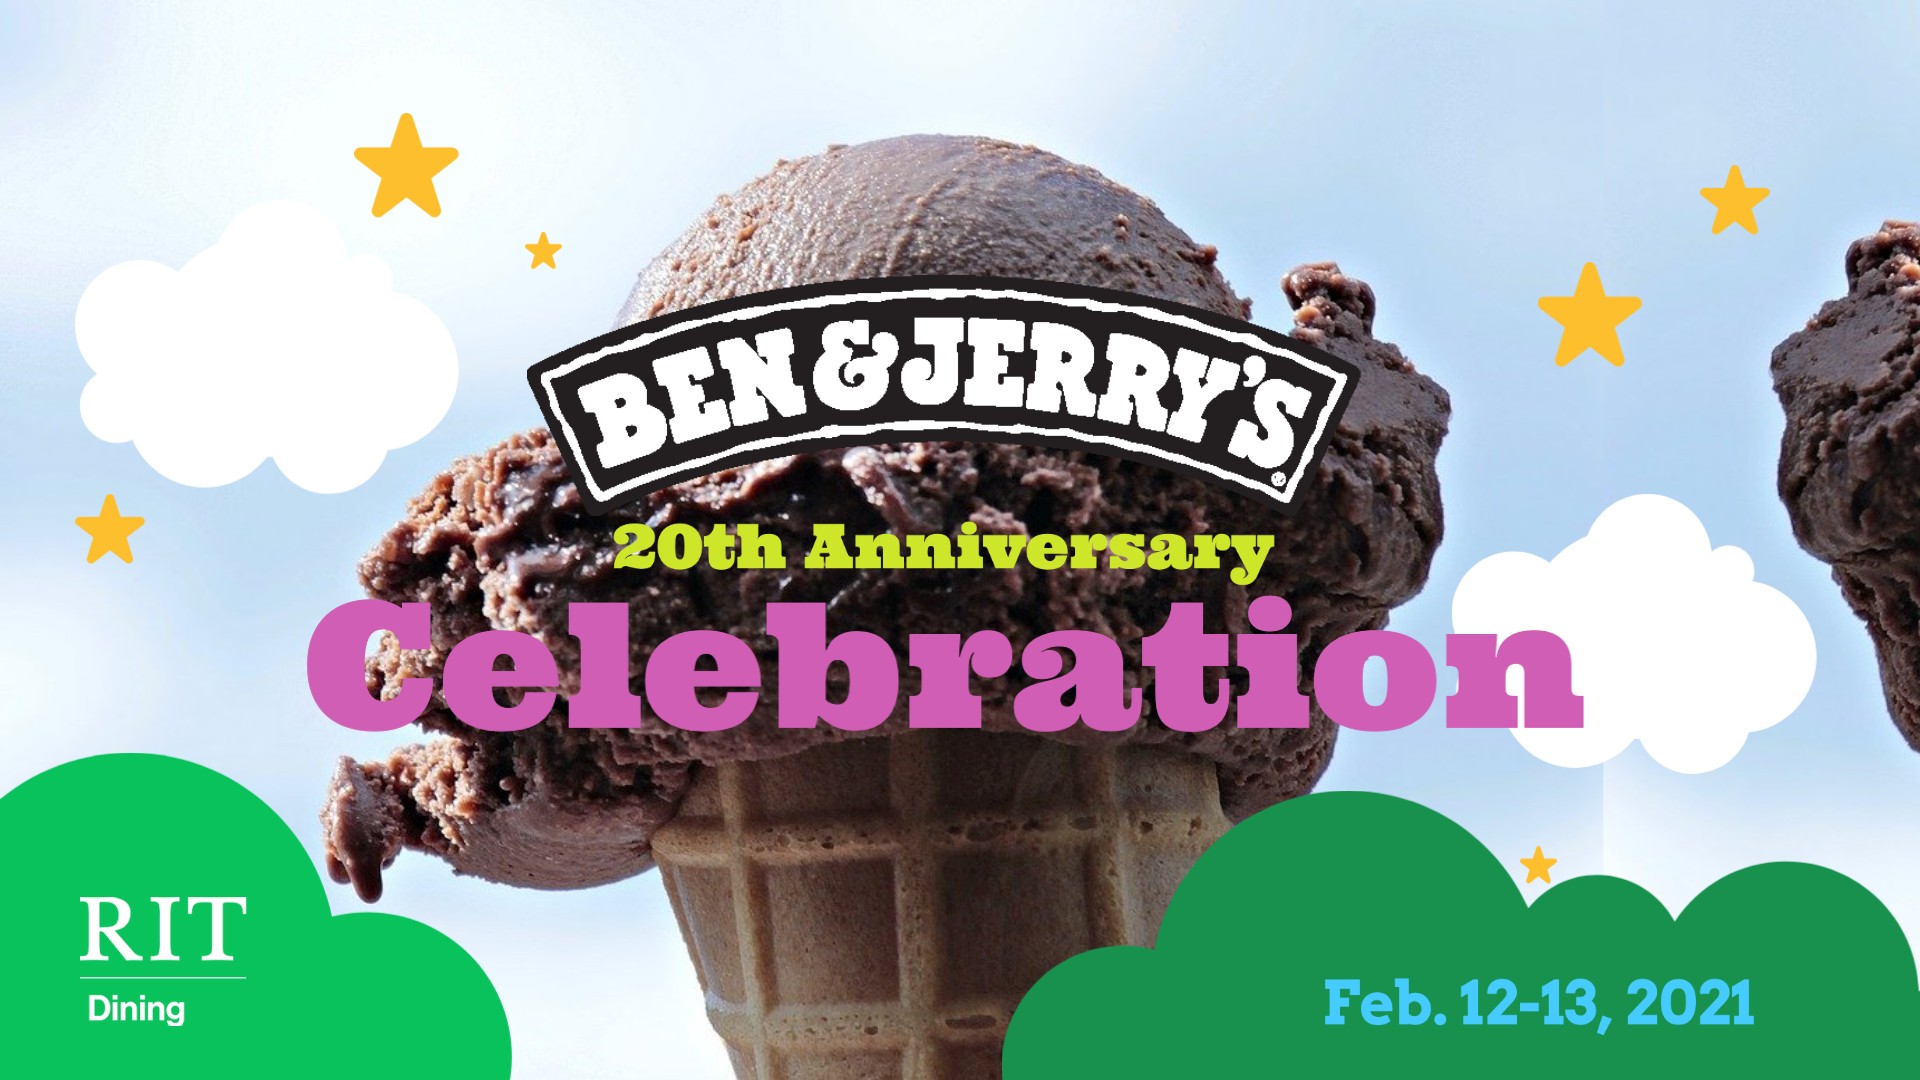 Chocolate ice cream cone surrounded by cloud and star graphics with "Ben & Jerry's 20th Anniversary Celebration"